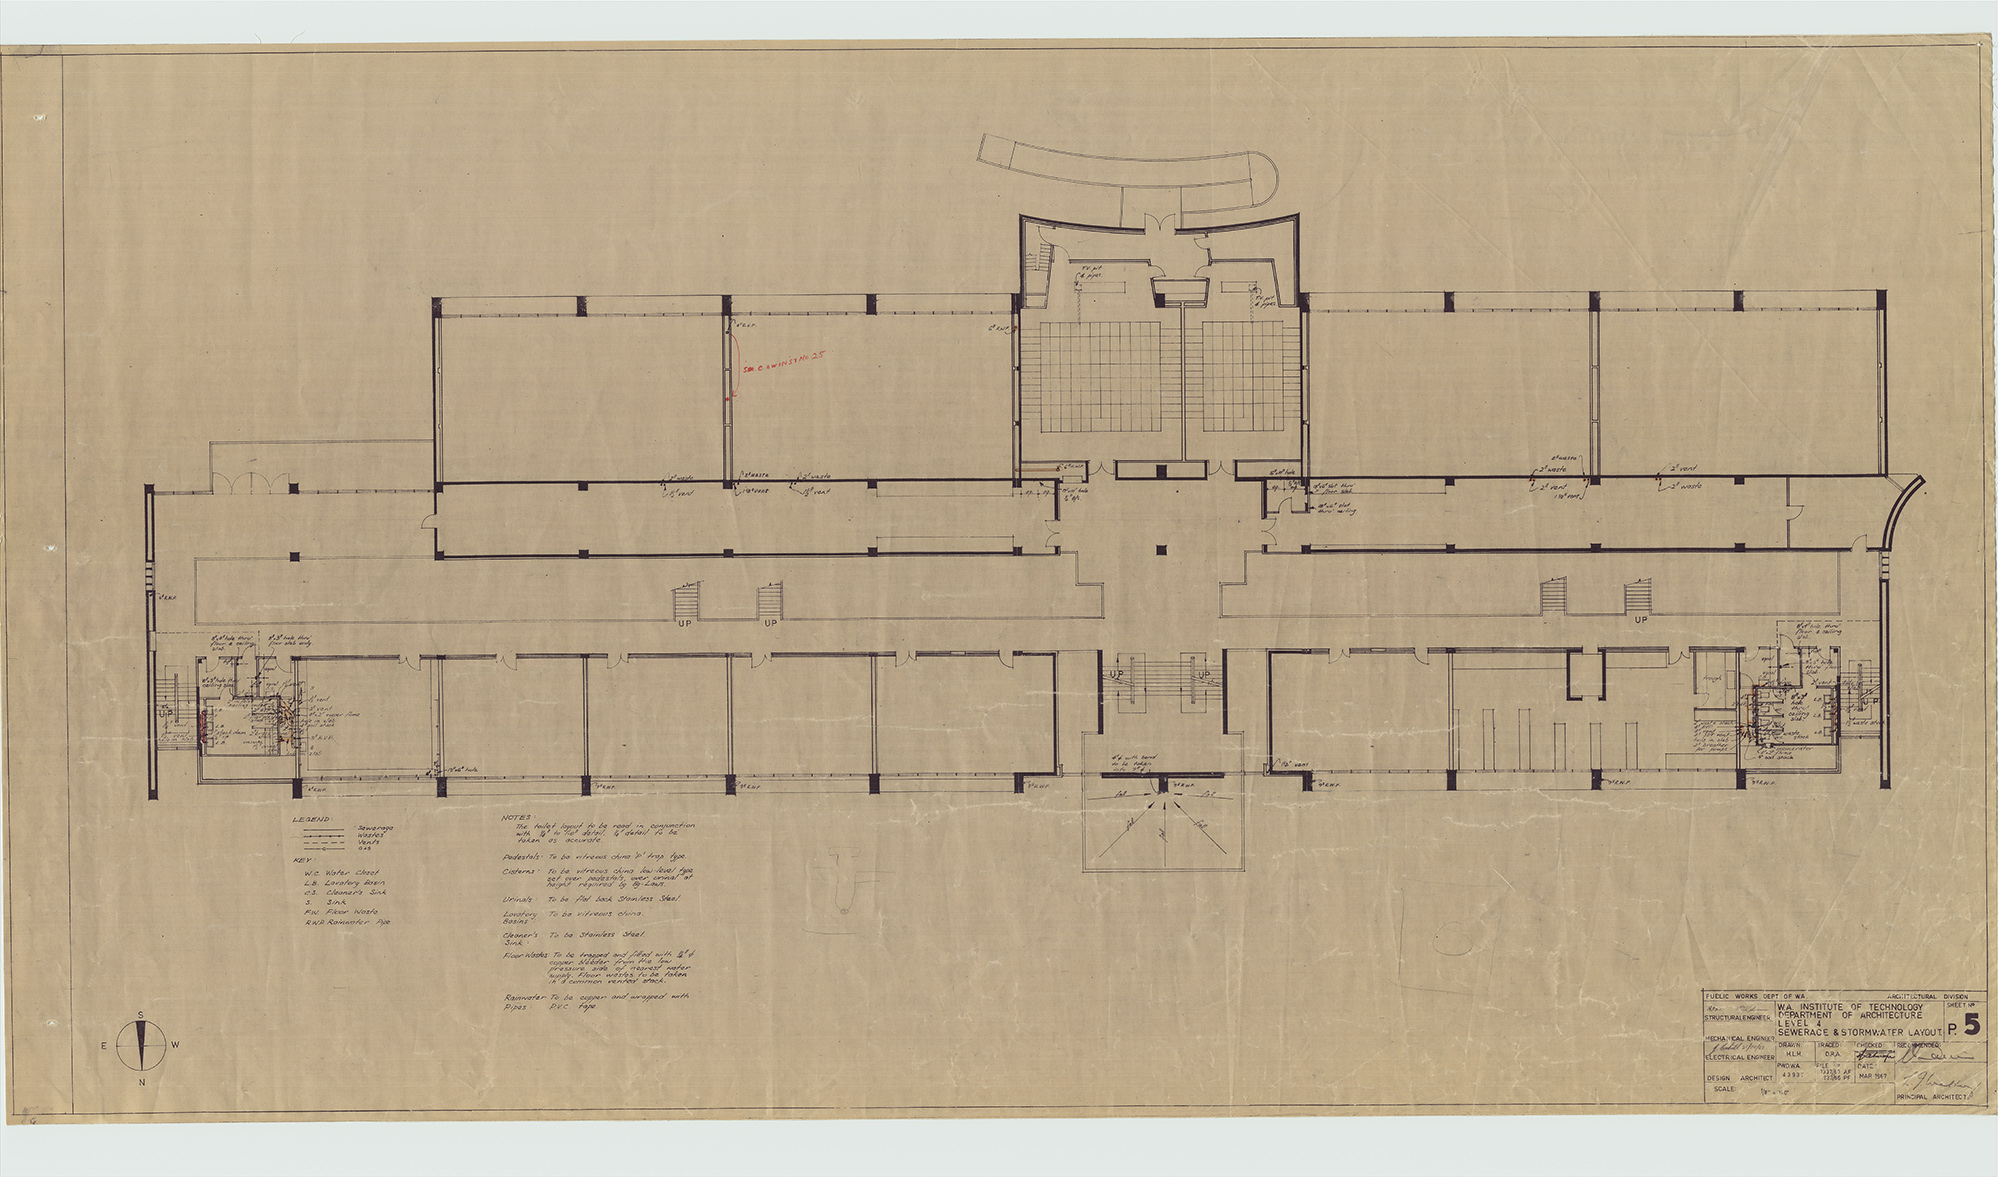 An architectural draft of a building structure on light brown paper.